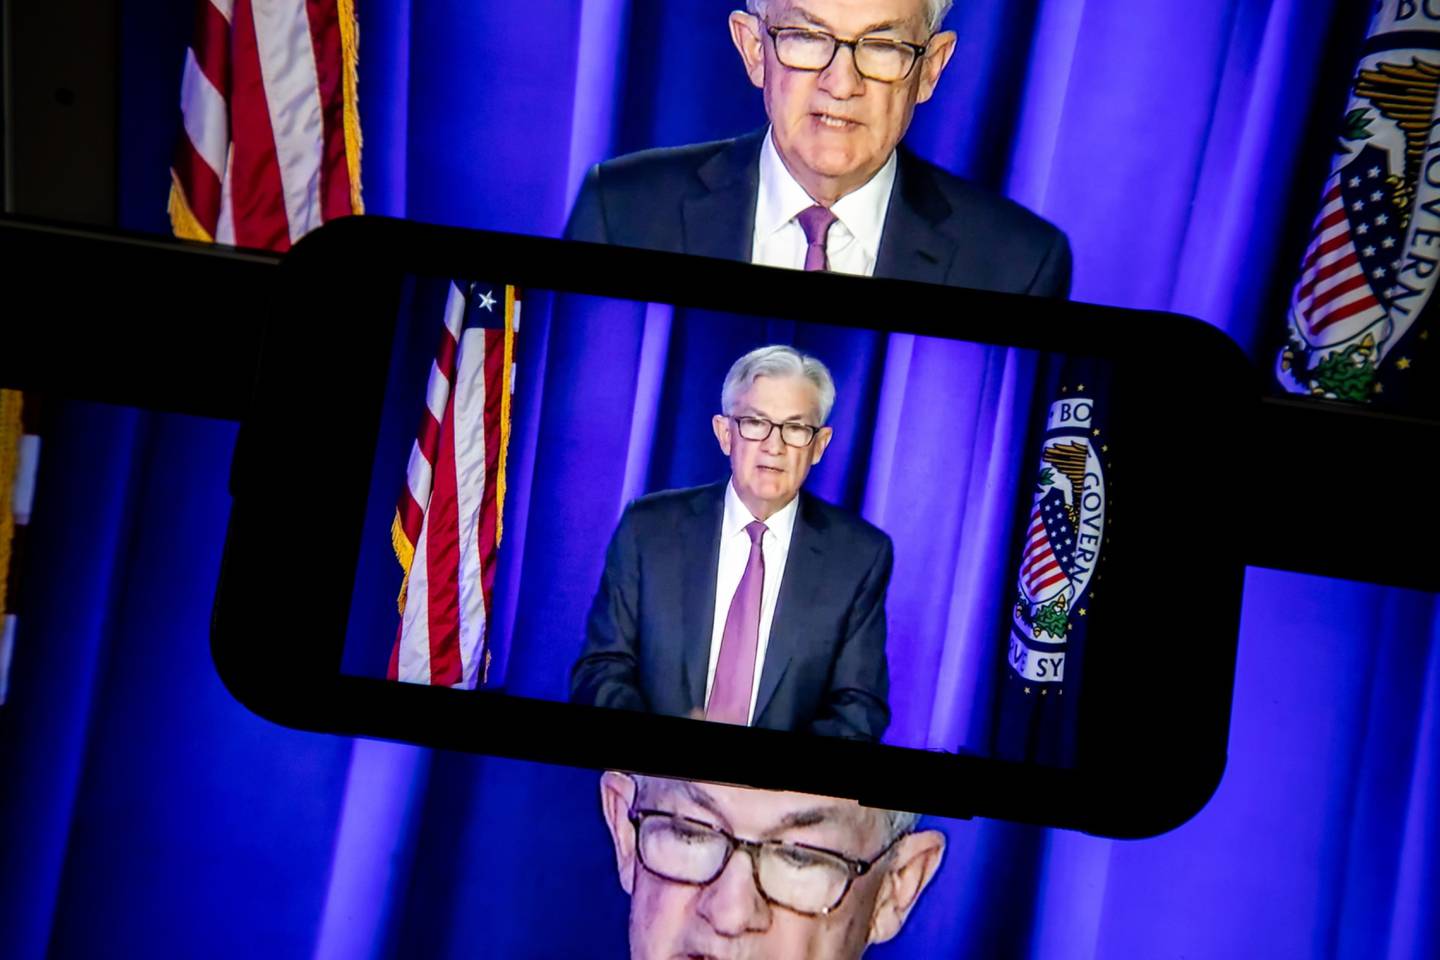 Jerome Powell, chairman of the U.S. Federal Reserve, speaks during a live-streamed news conference following a Federal Open Market Committee (FOMC) meeting in New York, U.S., on Wednesday, March 16, 2022. The Federal Reserve raised interest rates by a quarter percentage point and signaled hikes at all six remaining meetings this year, launching a campaign to tackle the fastest inflation in four decades even as risks to economic growth mount. Photographer: Michael Nagle/Bloomberg